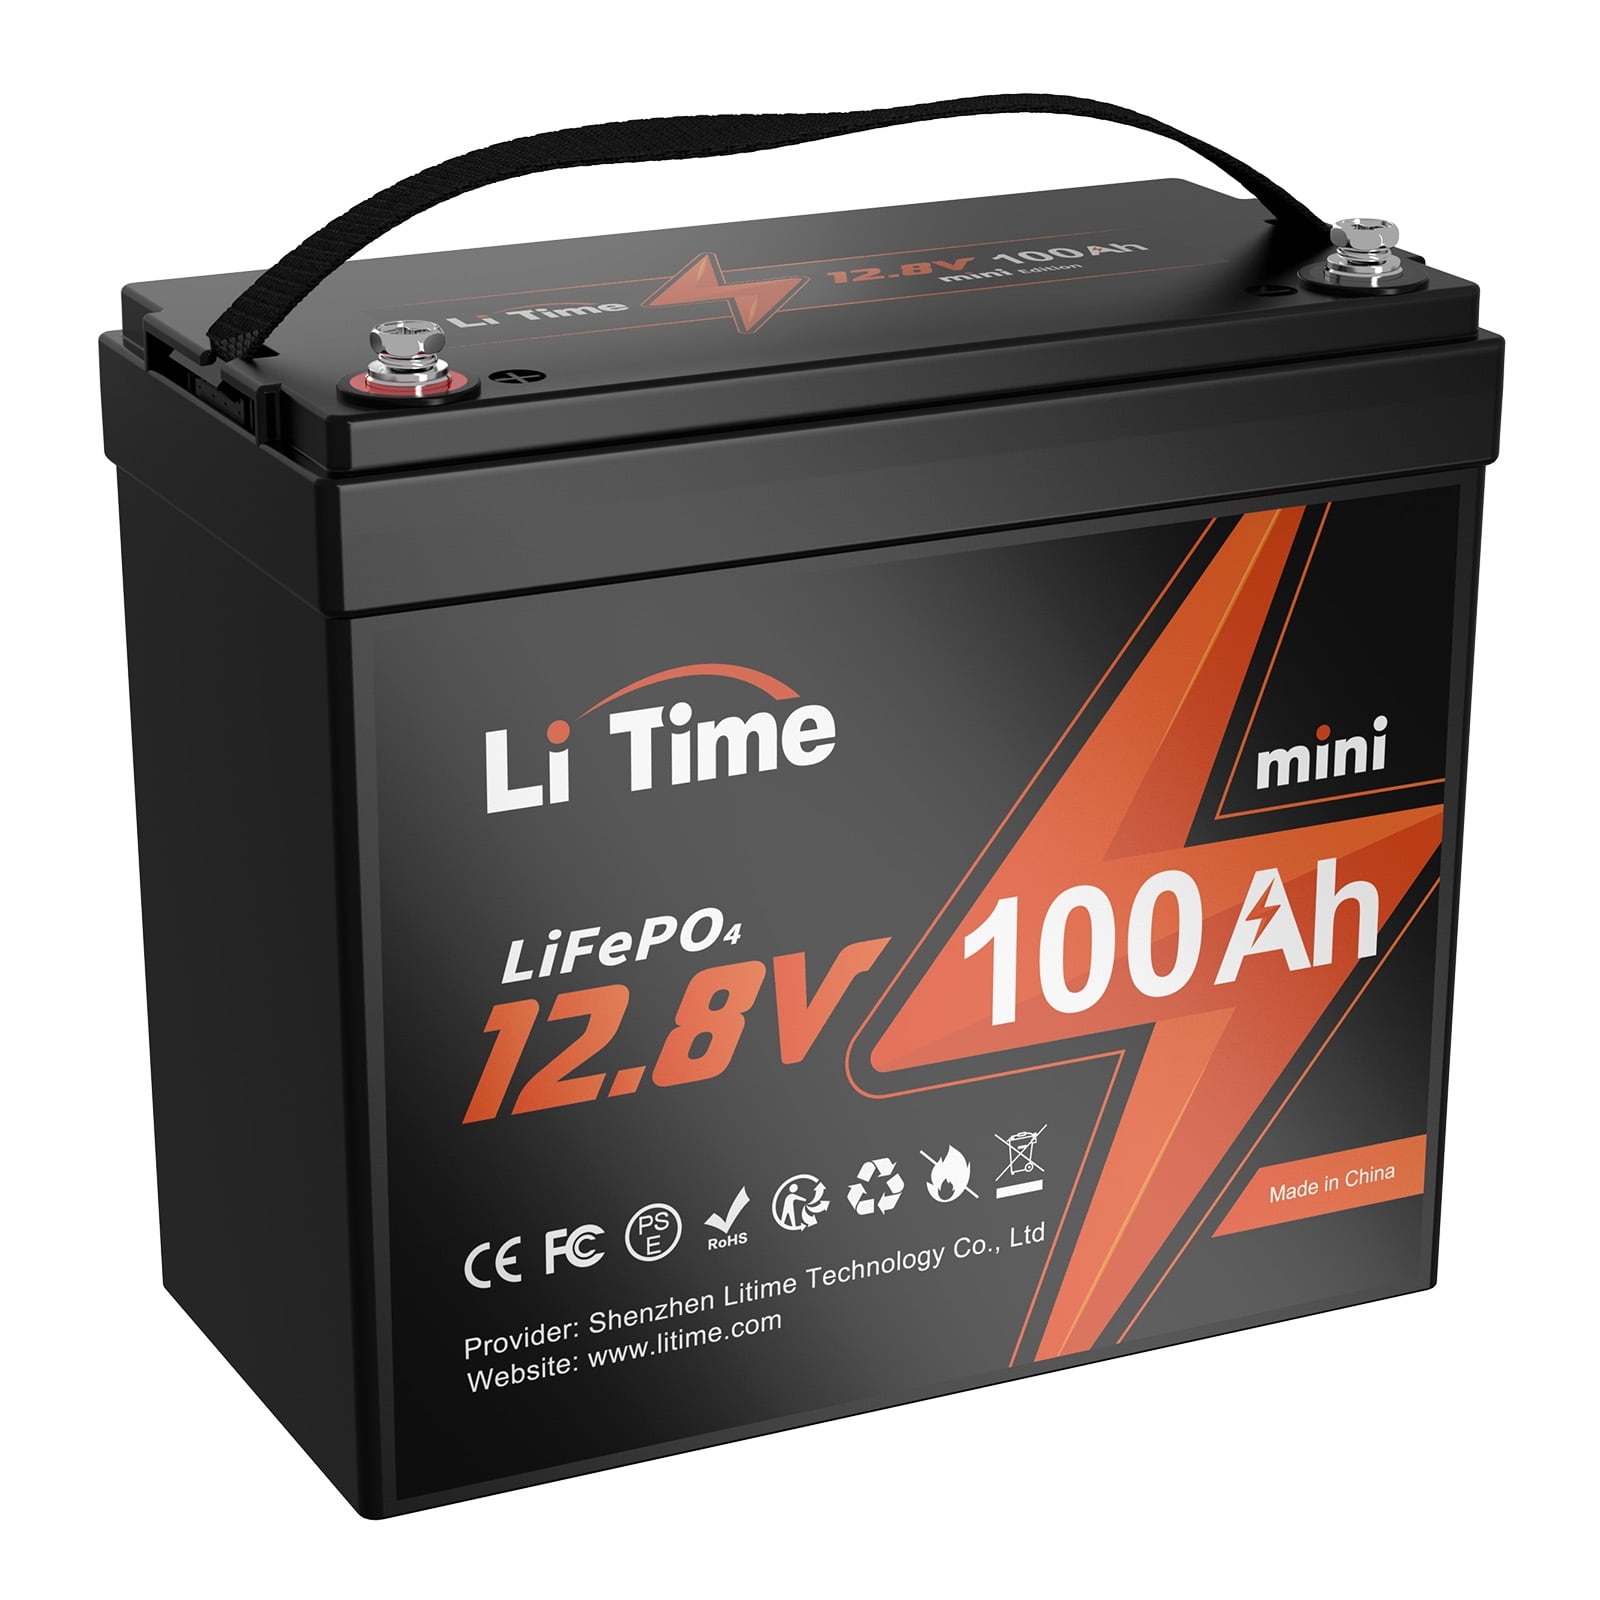 LiTime 12V 100Ah MINI LiFePO4 Lithium Battery, Upgraded Max. 1280Wh Energy  Small Size LiFePO4 Battery with Upgraded 100A BMS for RV, Camper, Solar